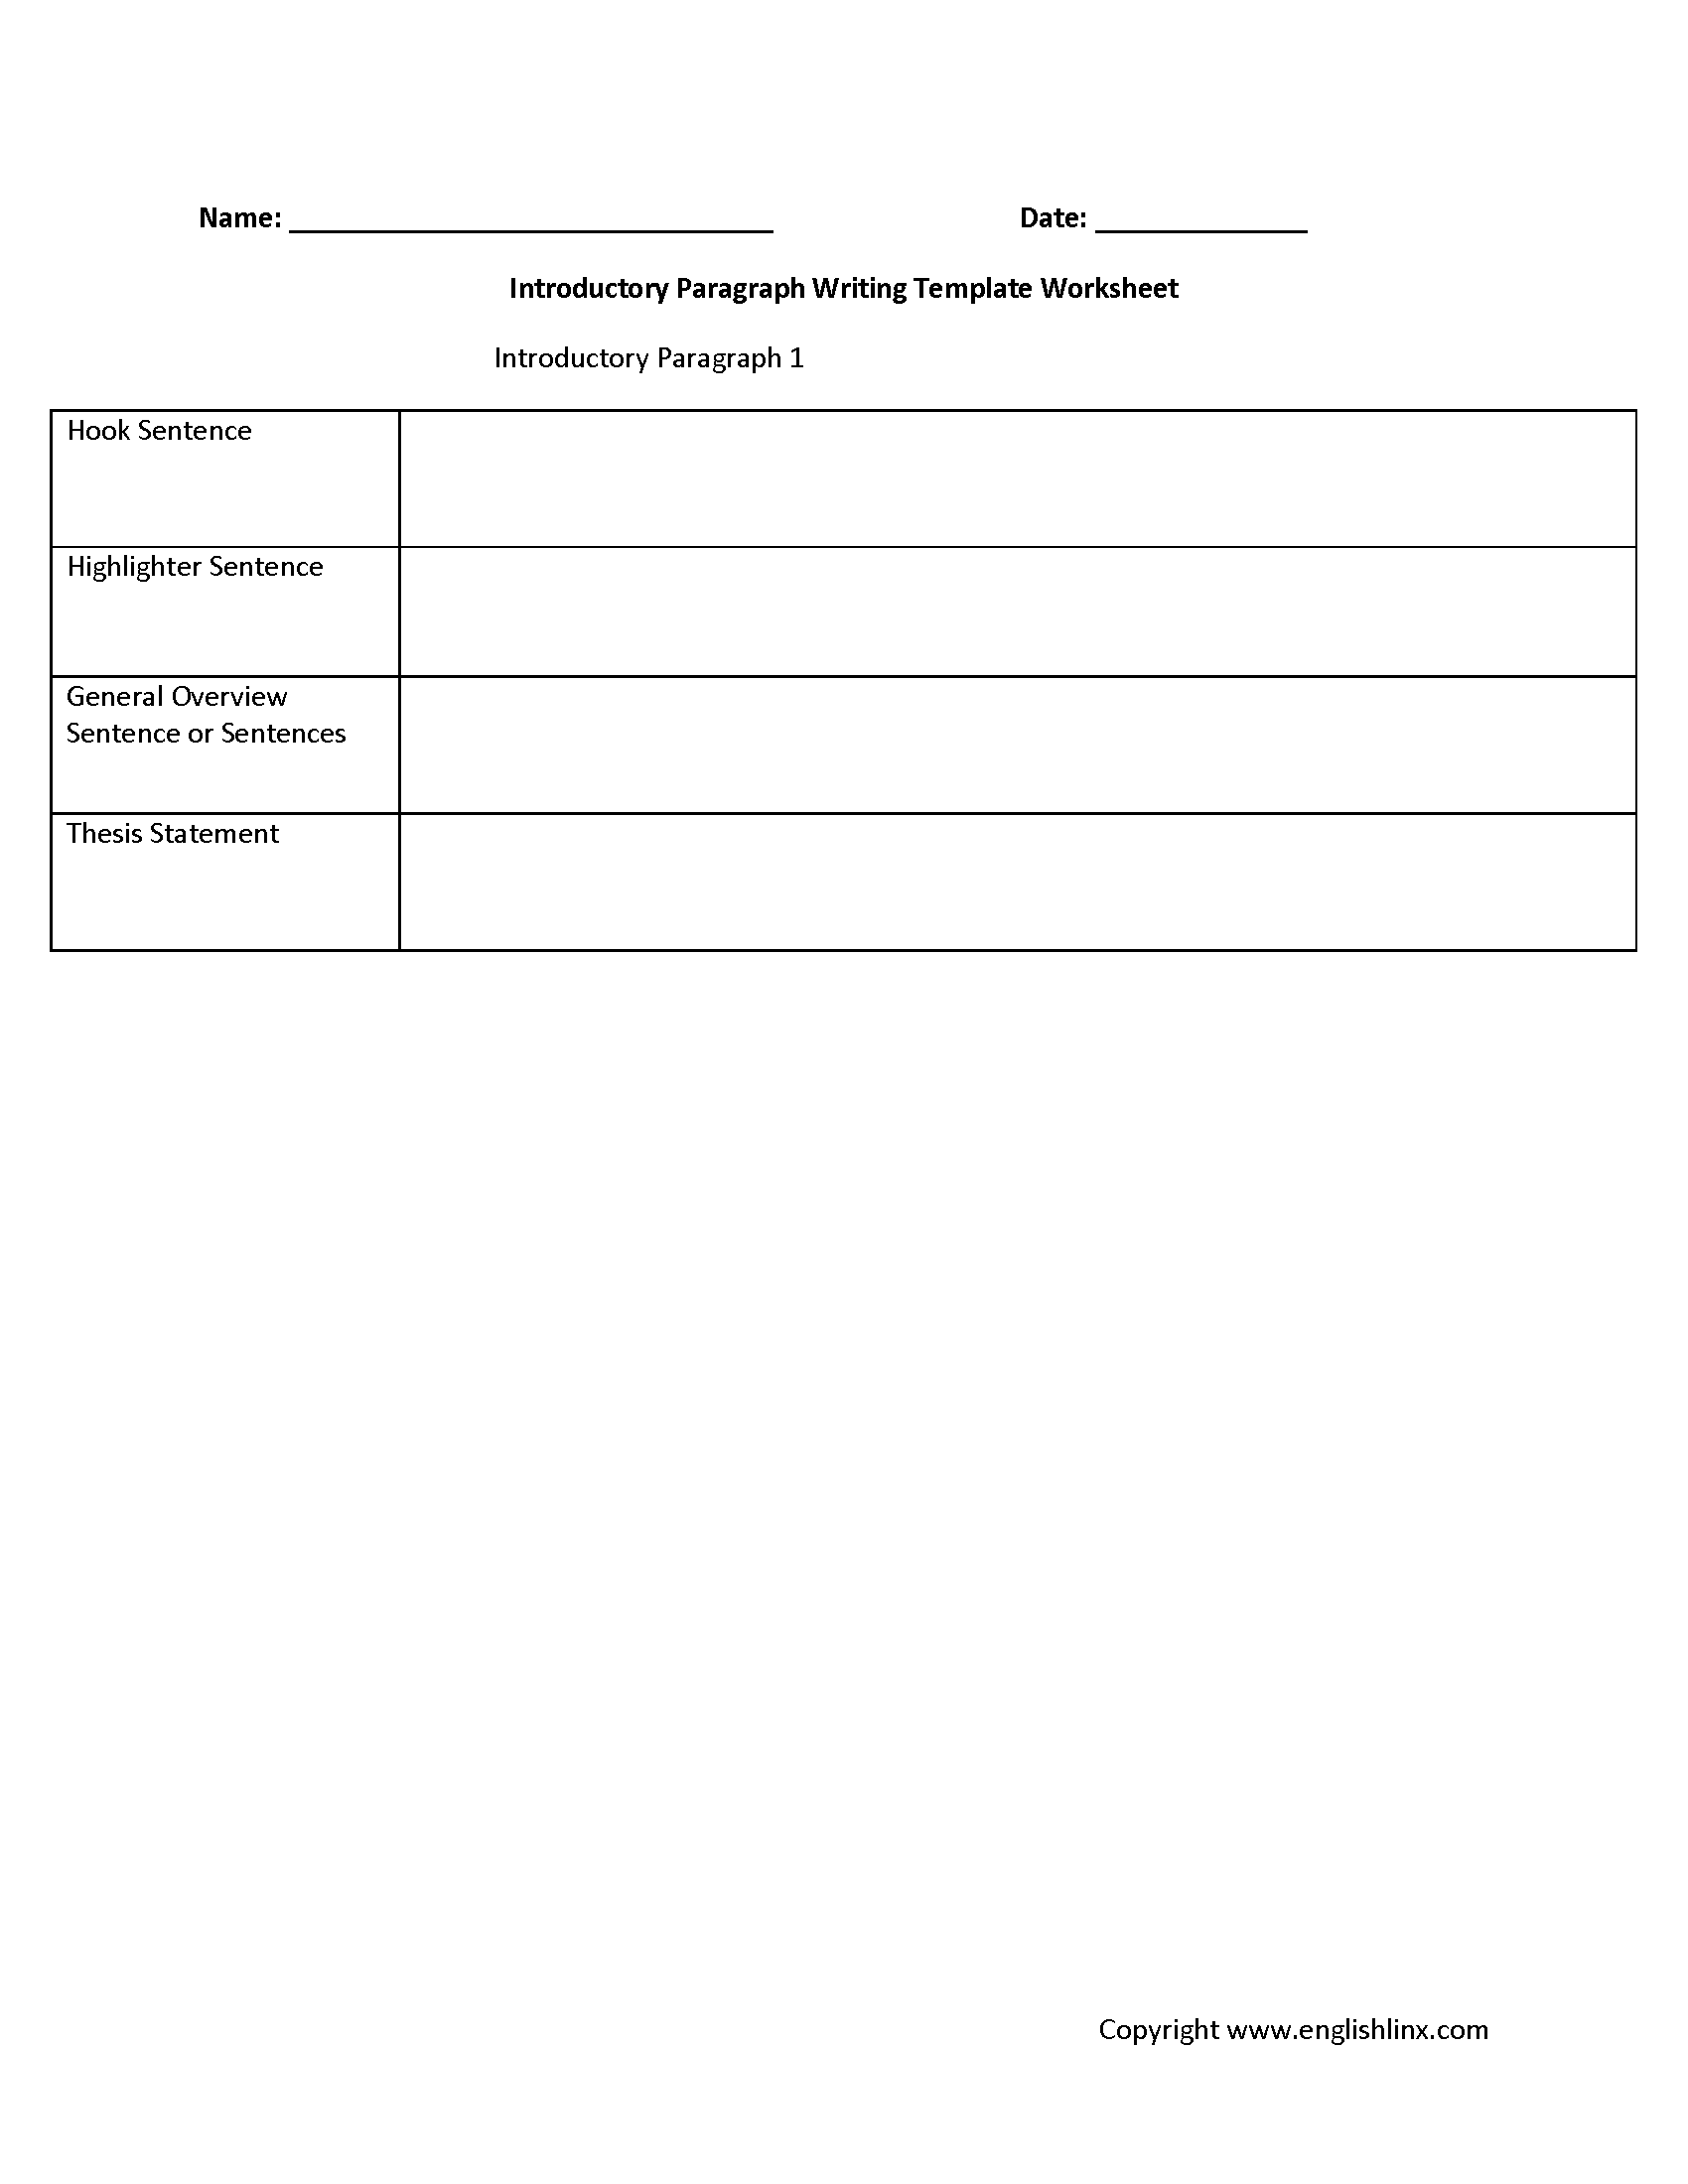 Introductory Paragraph Writing Template Worksheet